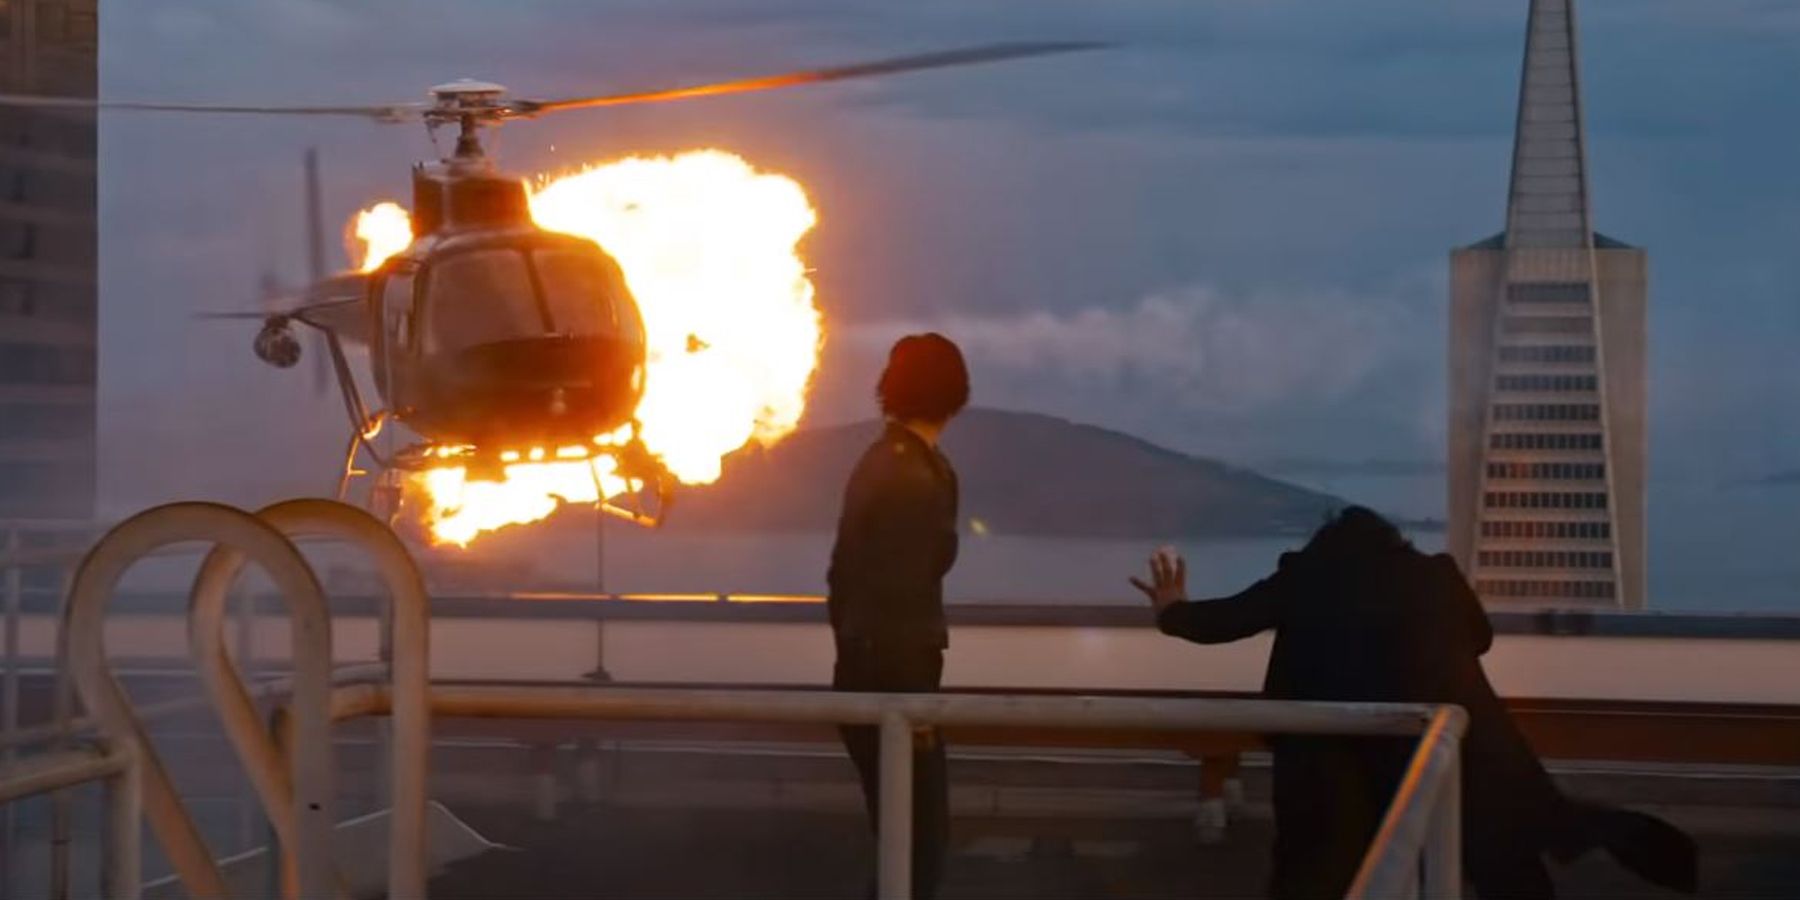 Neo attacking a helicopter